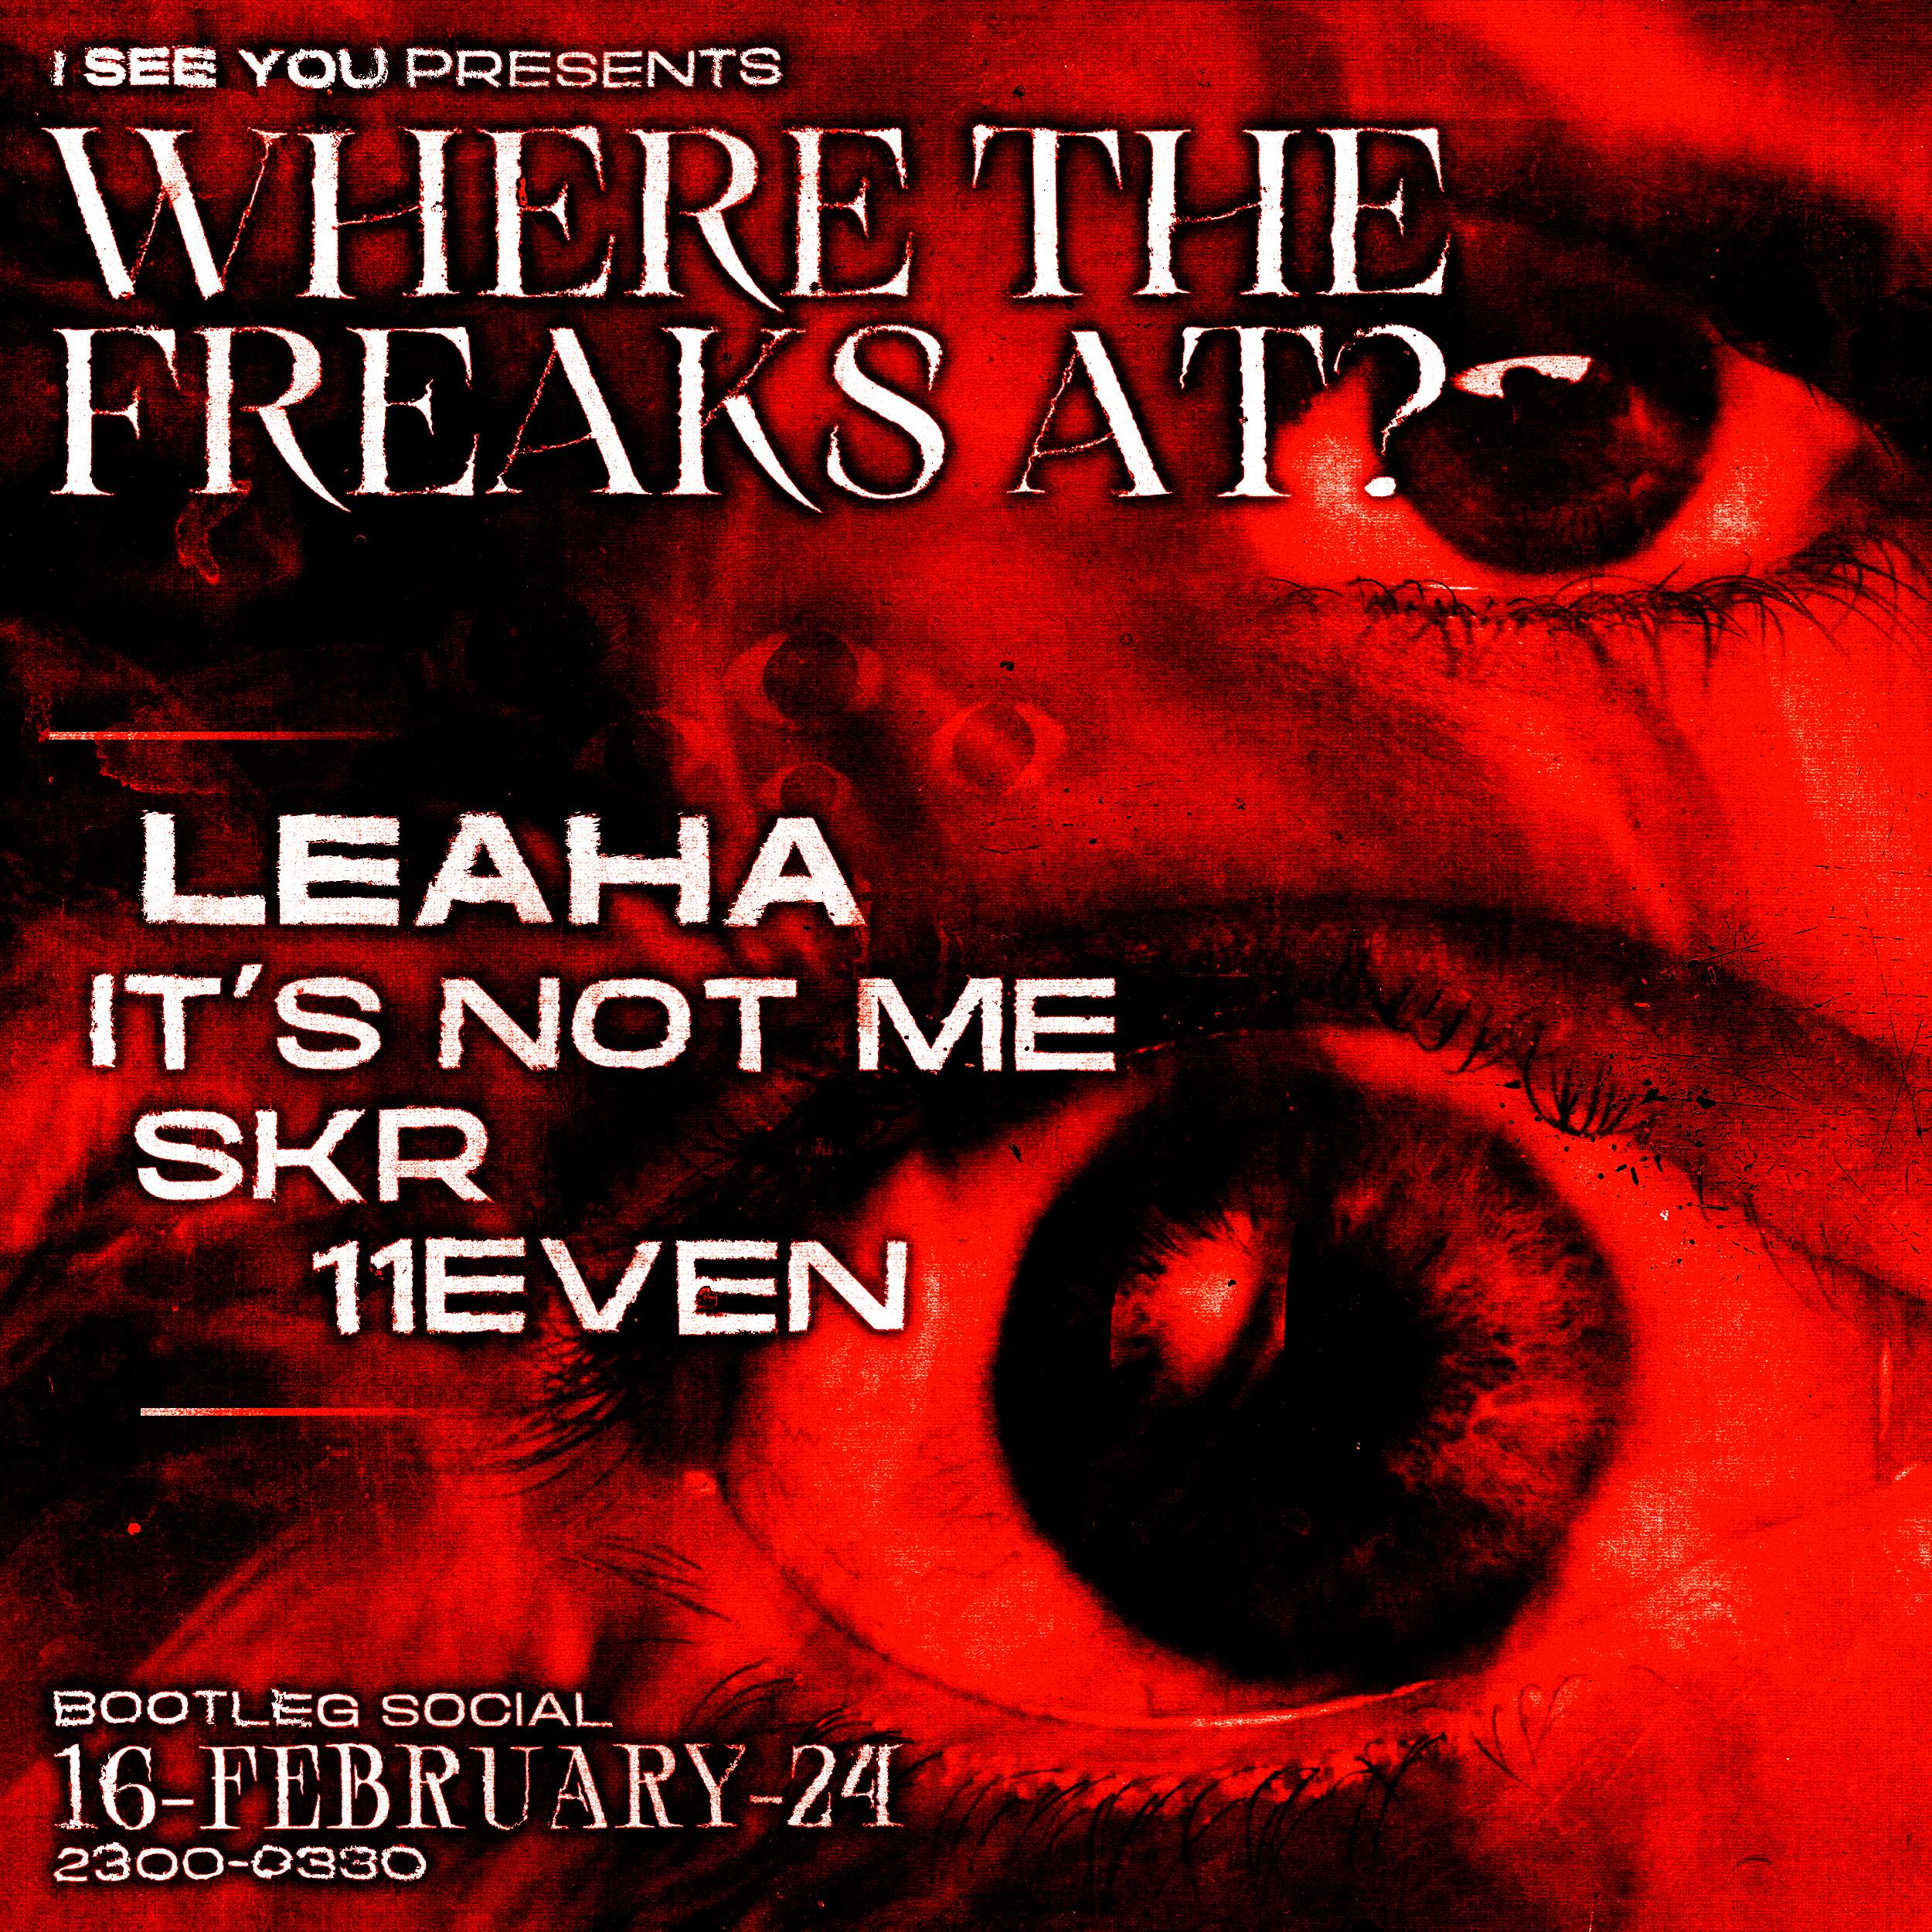 I See You: Where the Freaks at - フライヤー表